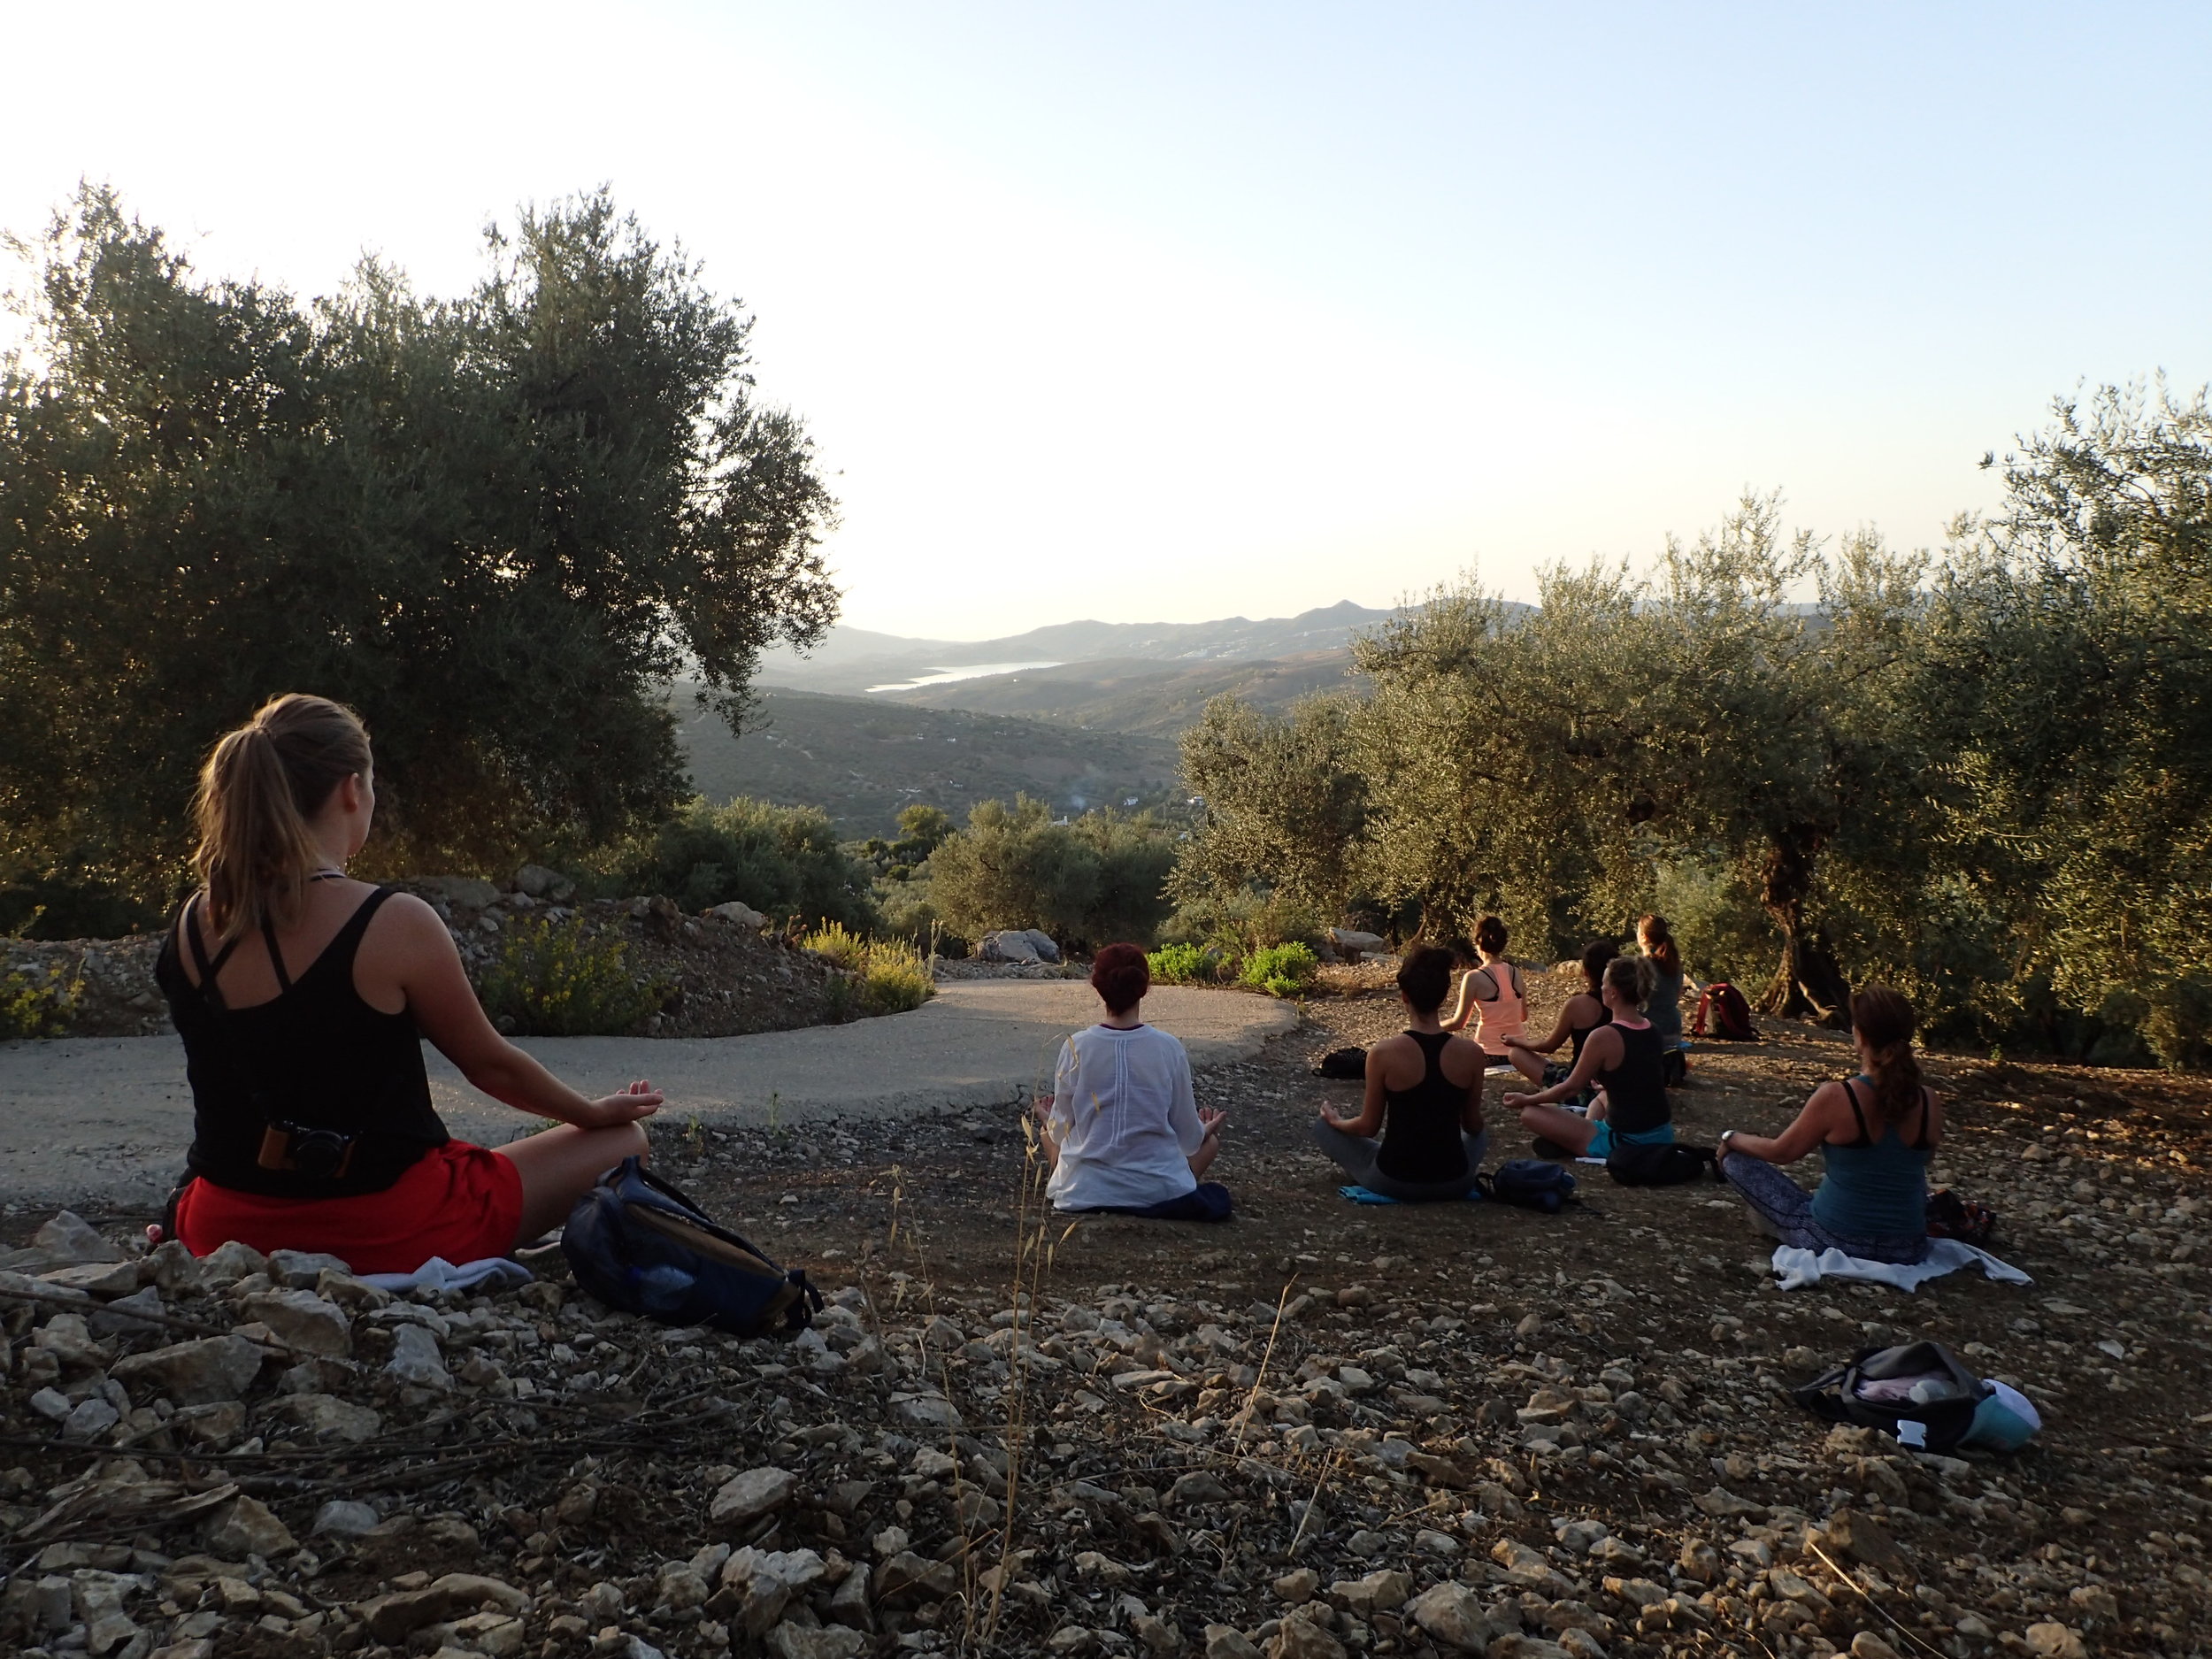 Meditation on the mountain at Yin Yang Yoga retreat in the Malaga mountains in Spain with Jane Bakx Yoga (Copy) (Copy)